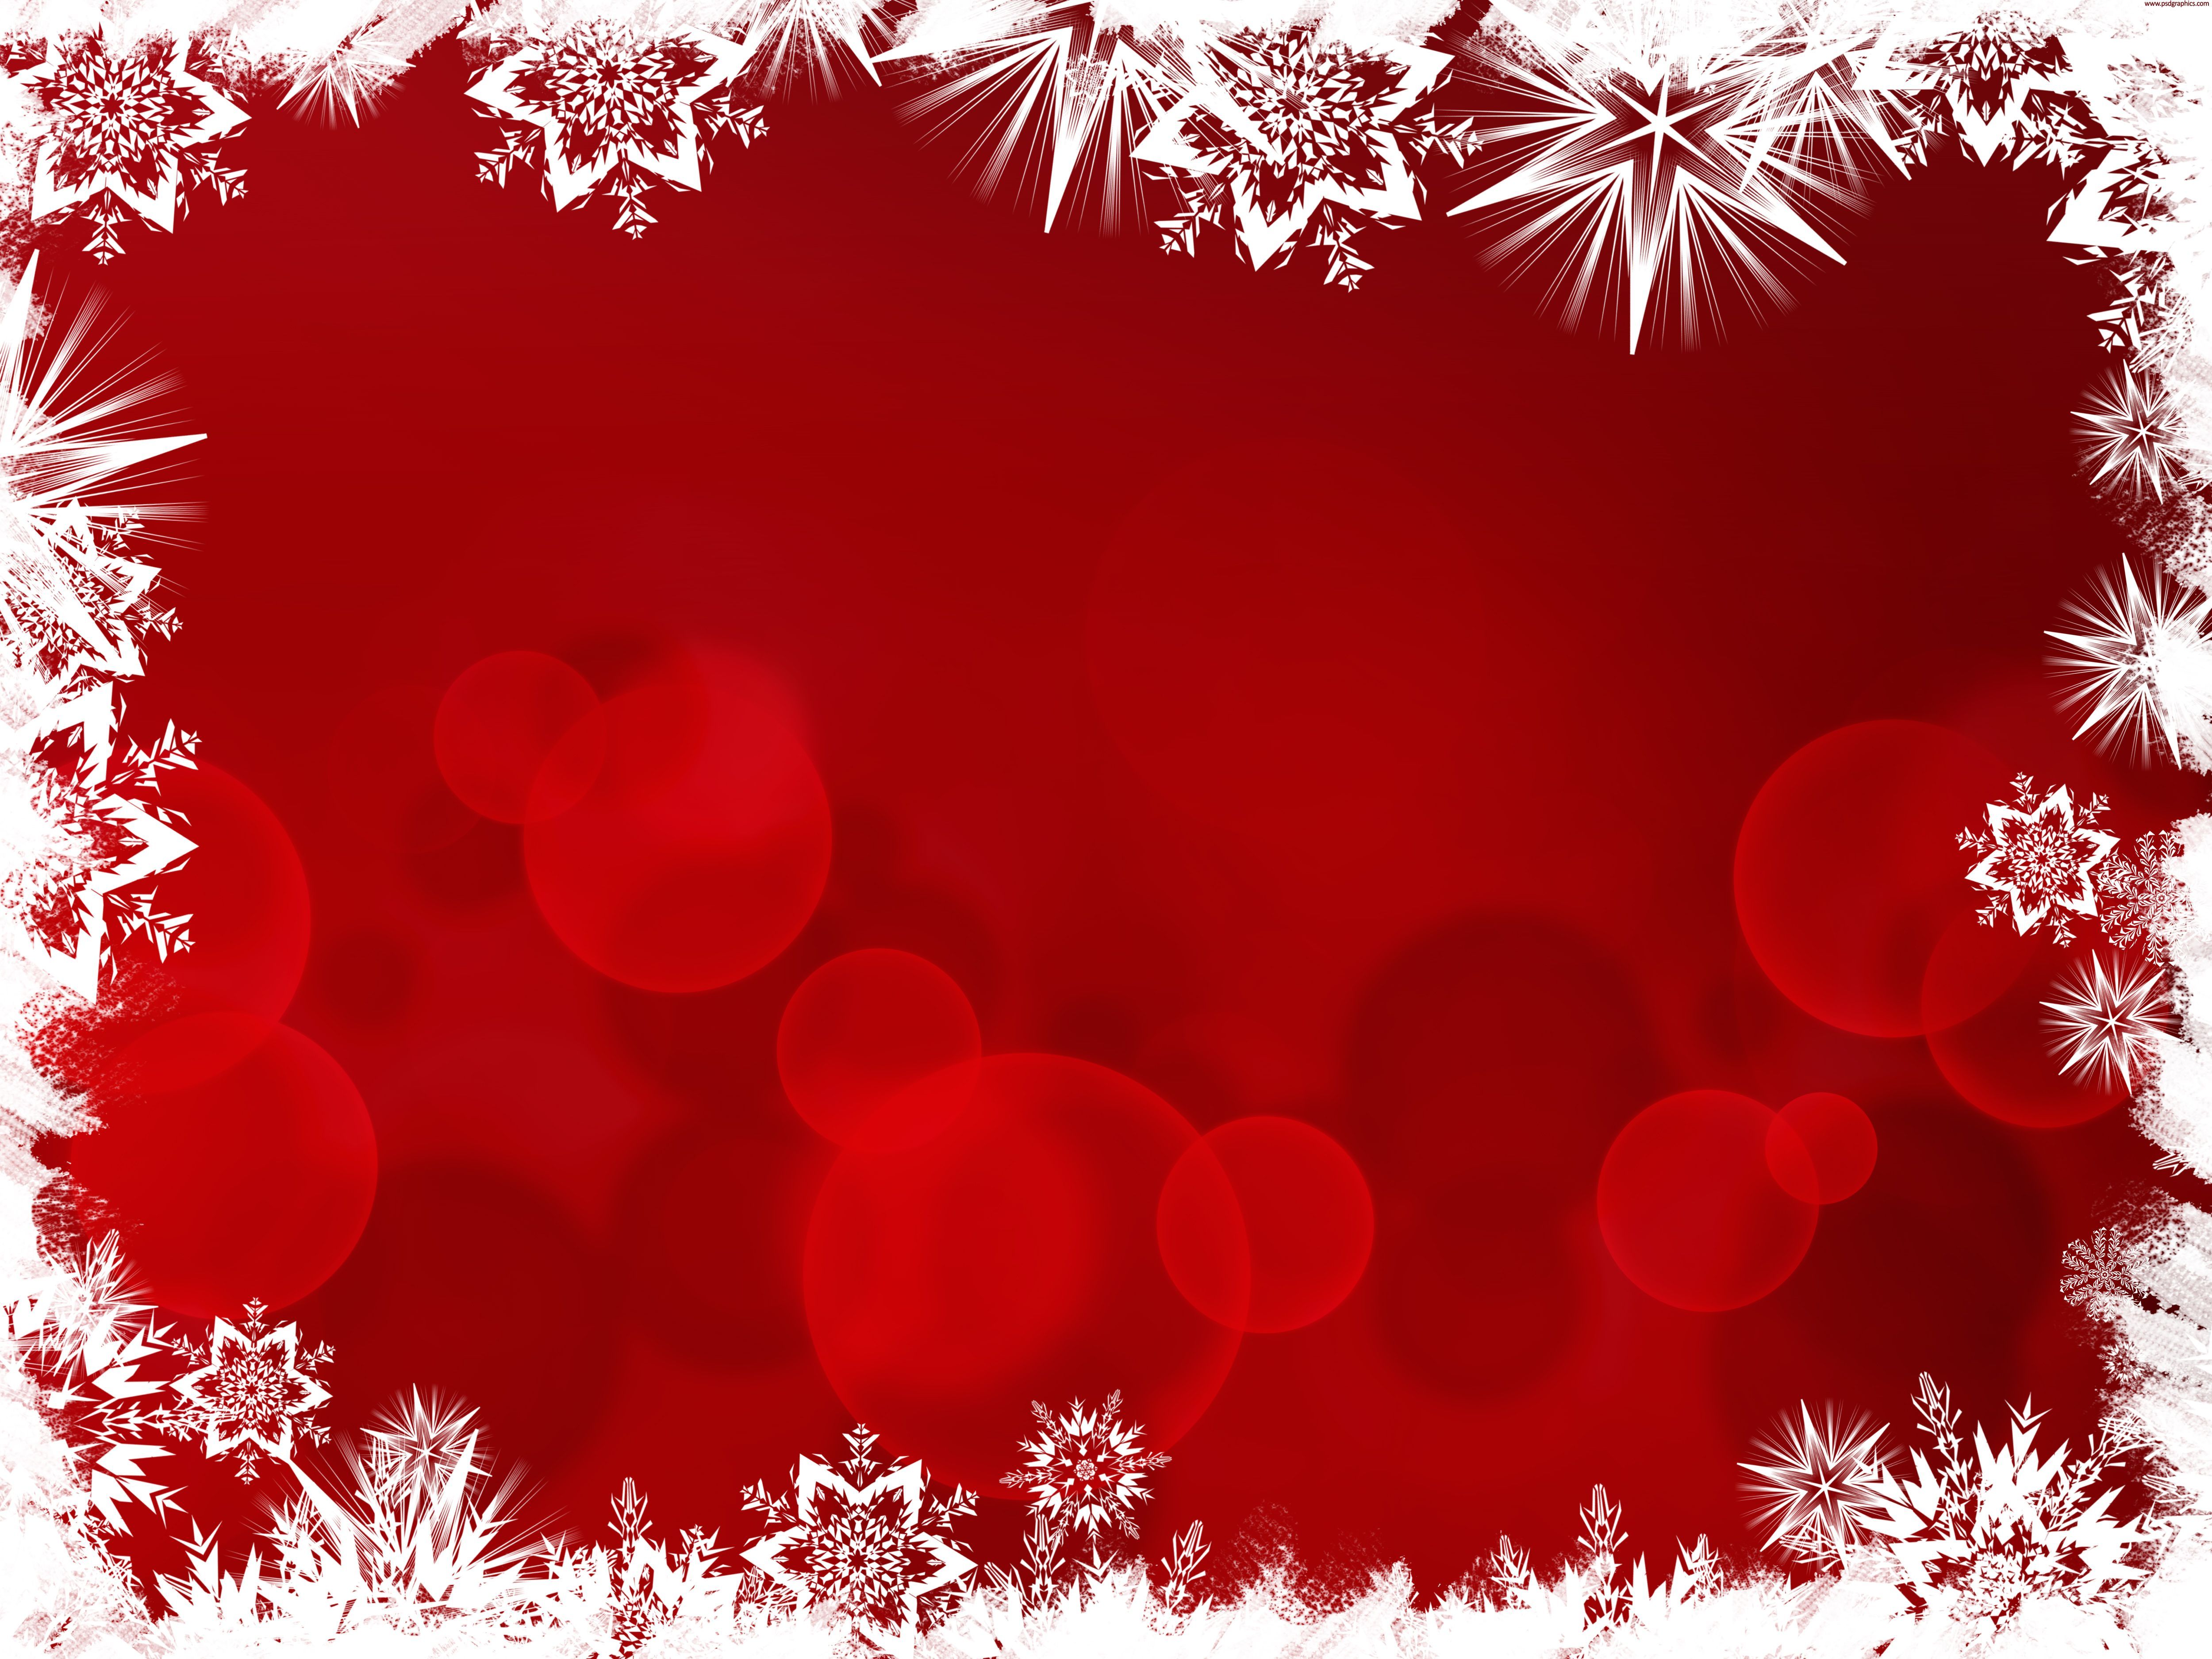 Merry Christmas!. PSDGraphics. Christmas picture background, Christmas background, Free christmas background